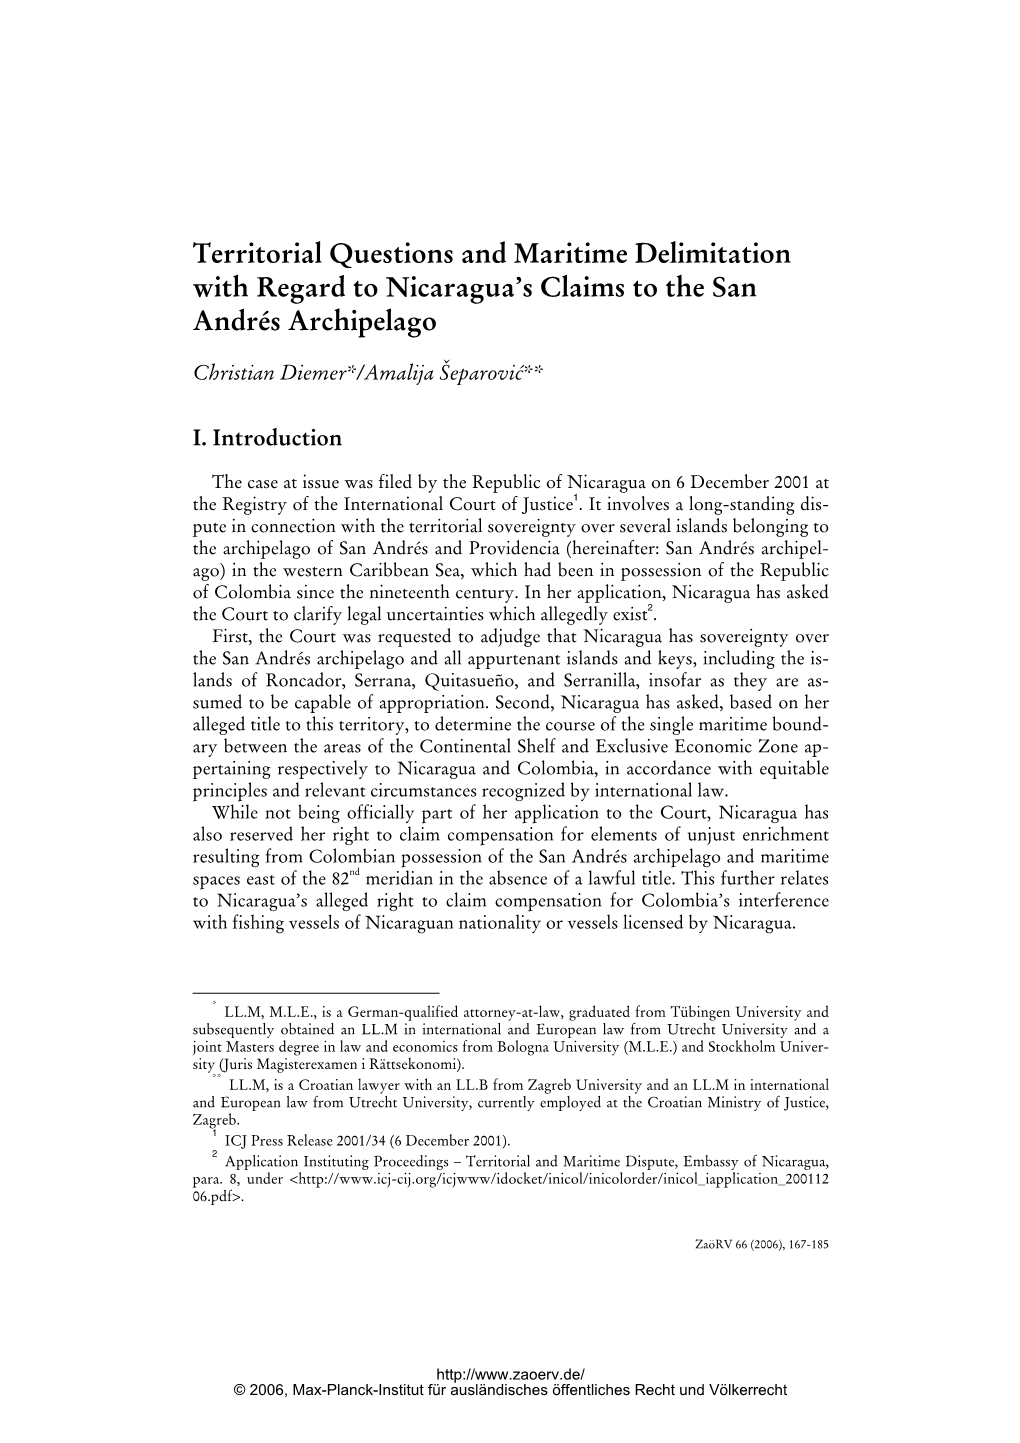 Territorial Questions and Maritime Delimitation with Regard to Nicaragua’S Claims to the San Andrés Archipelago